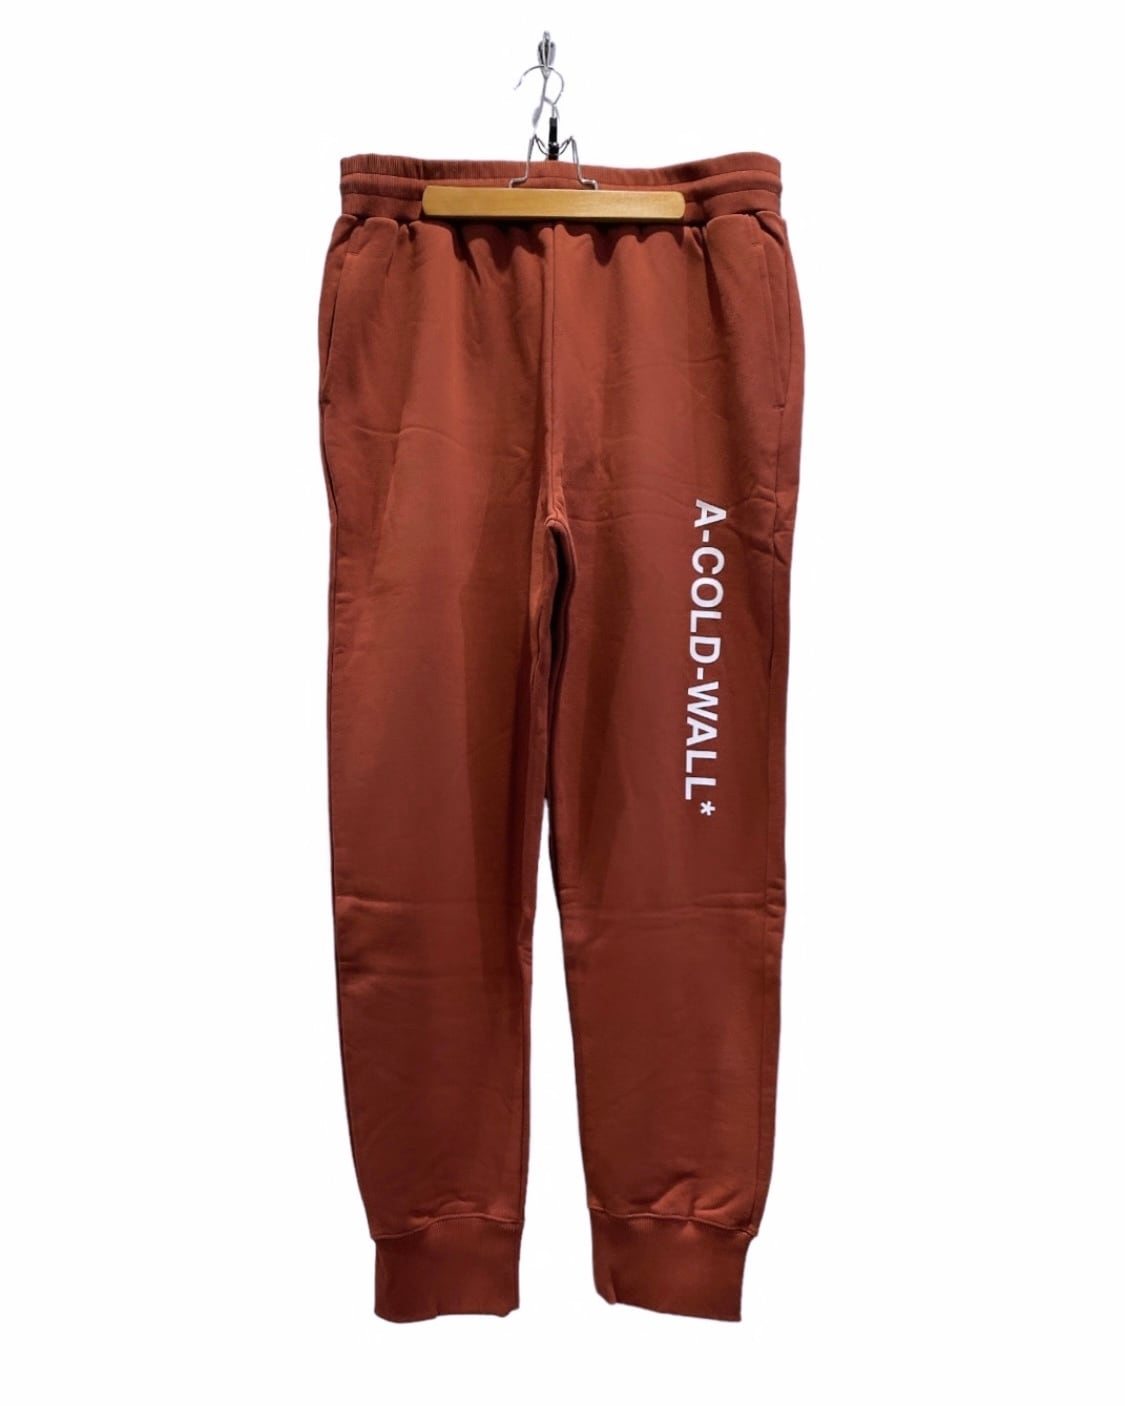 A-COLD-WALL* / ESSENTIAL LOGO SWEAT PANTS | Answer